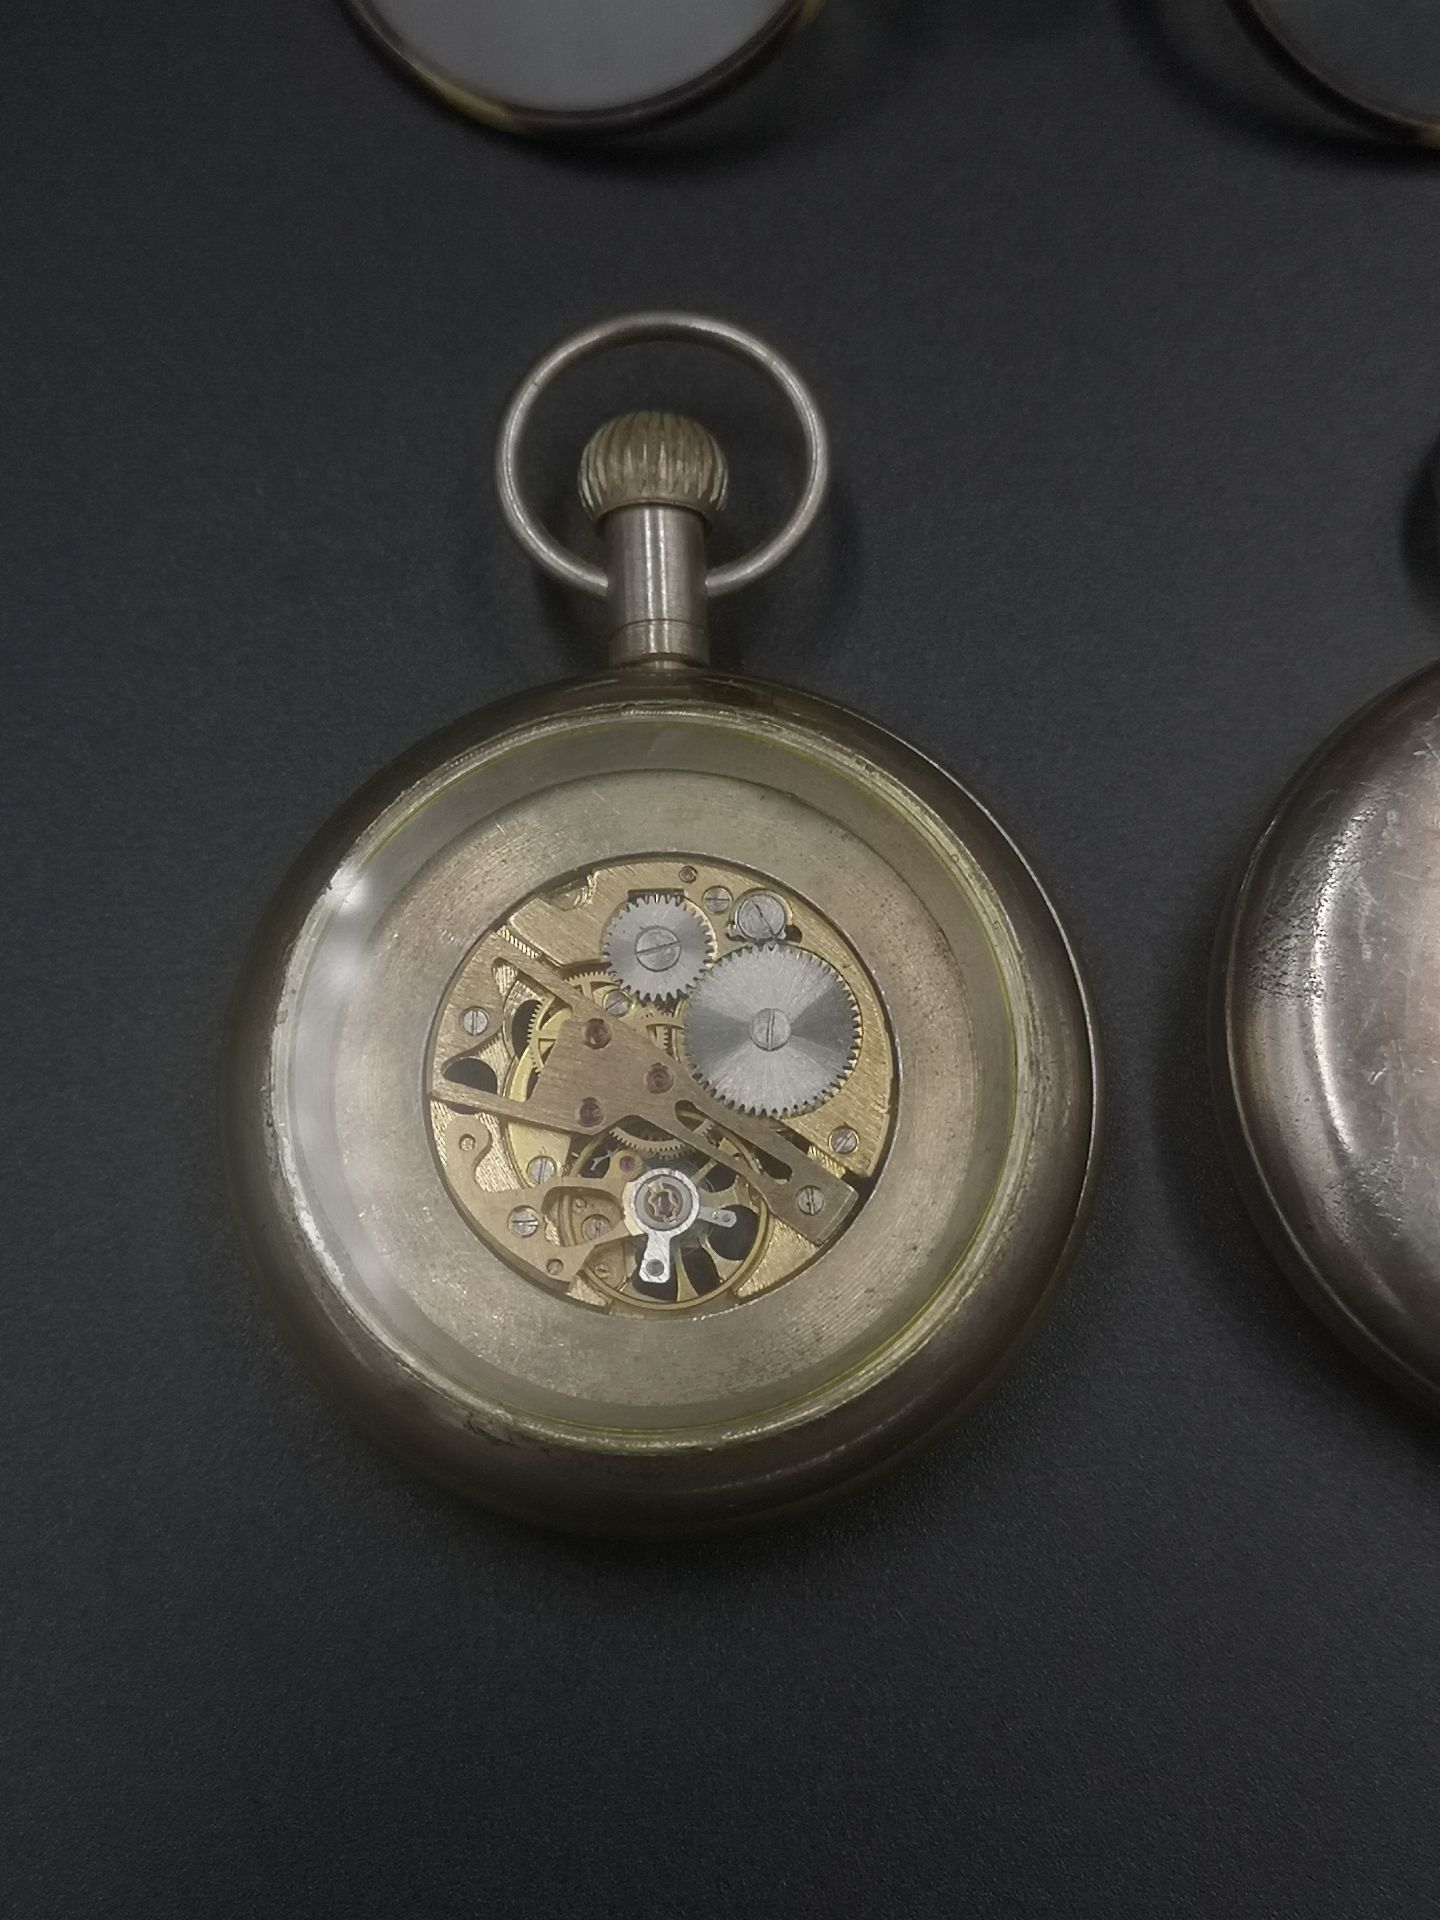 Waltham silver cased pocket watch; a pocket watch; rolled gold pair of spectacles - Image 4 of 7